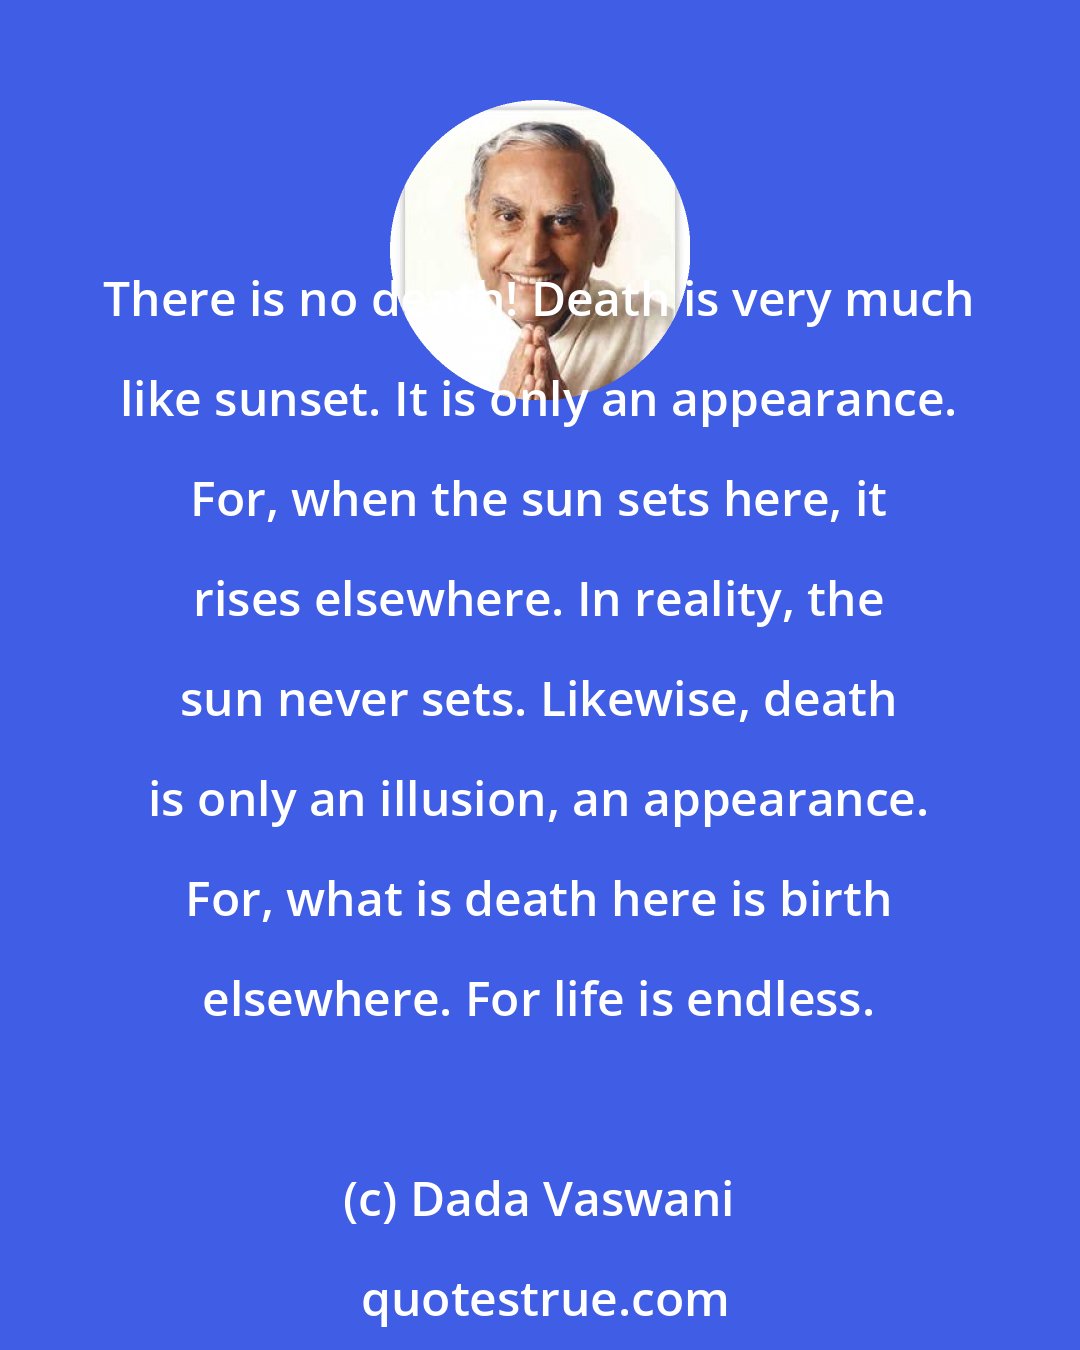 Dada Vaswani: There is no death! Death is very much like sunset. It is only an appearance. For, when the sun sets here, it rises elsewhere. In reality, the sun never sets. Likewise, death is only an illusion, an appearance. For, what is death here is birth elsewhere. For life is endless.